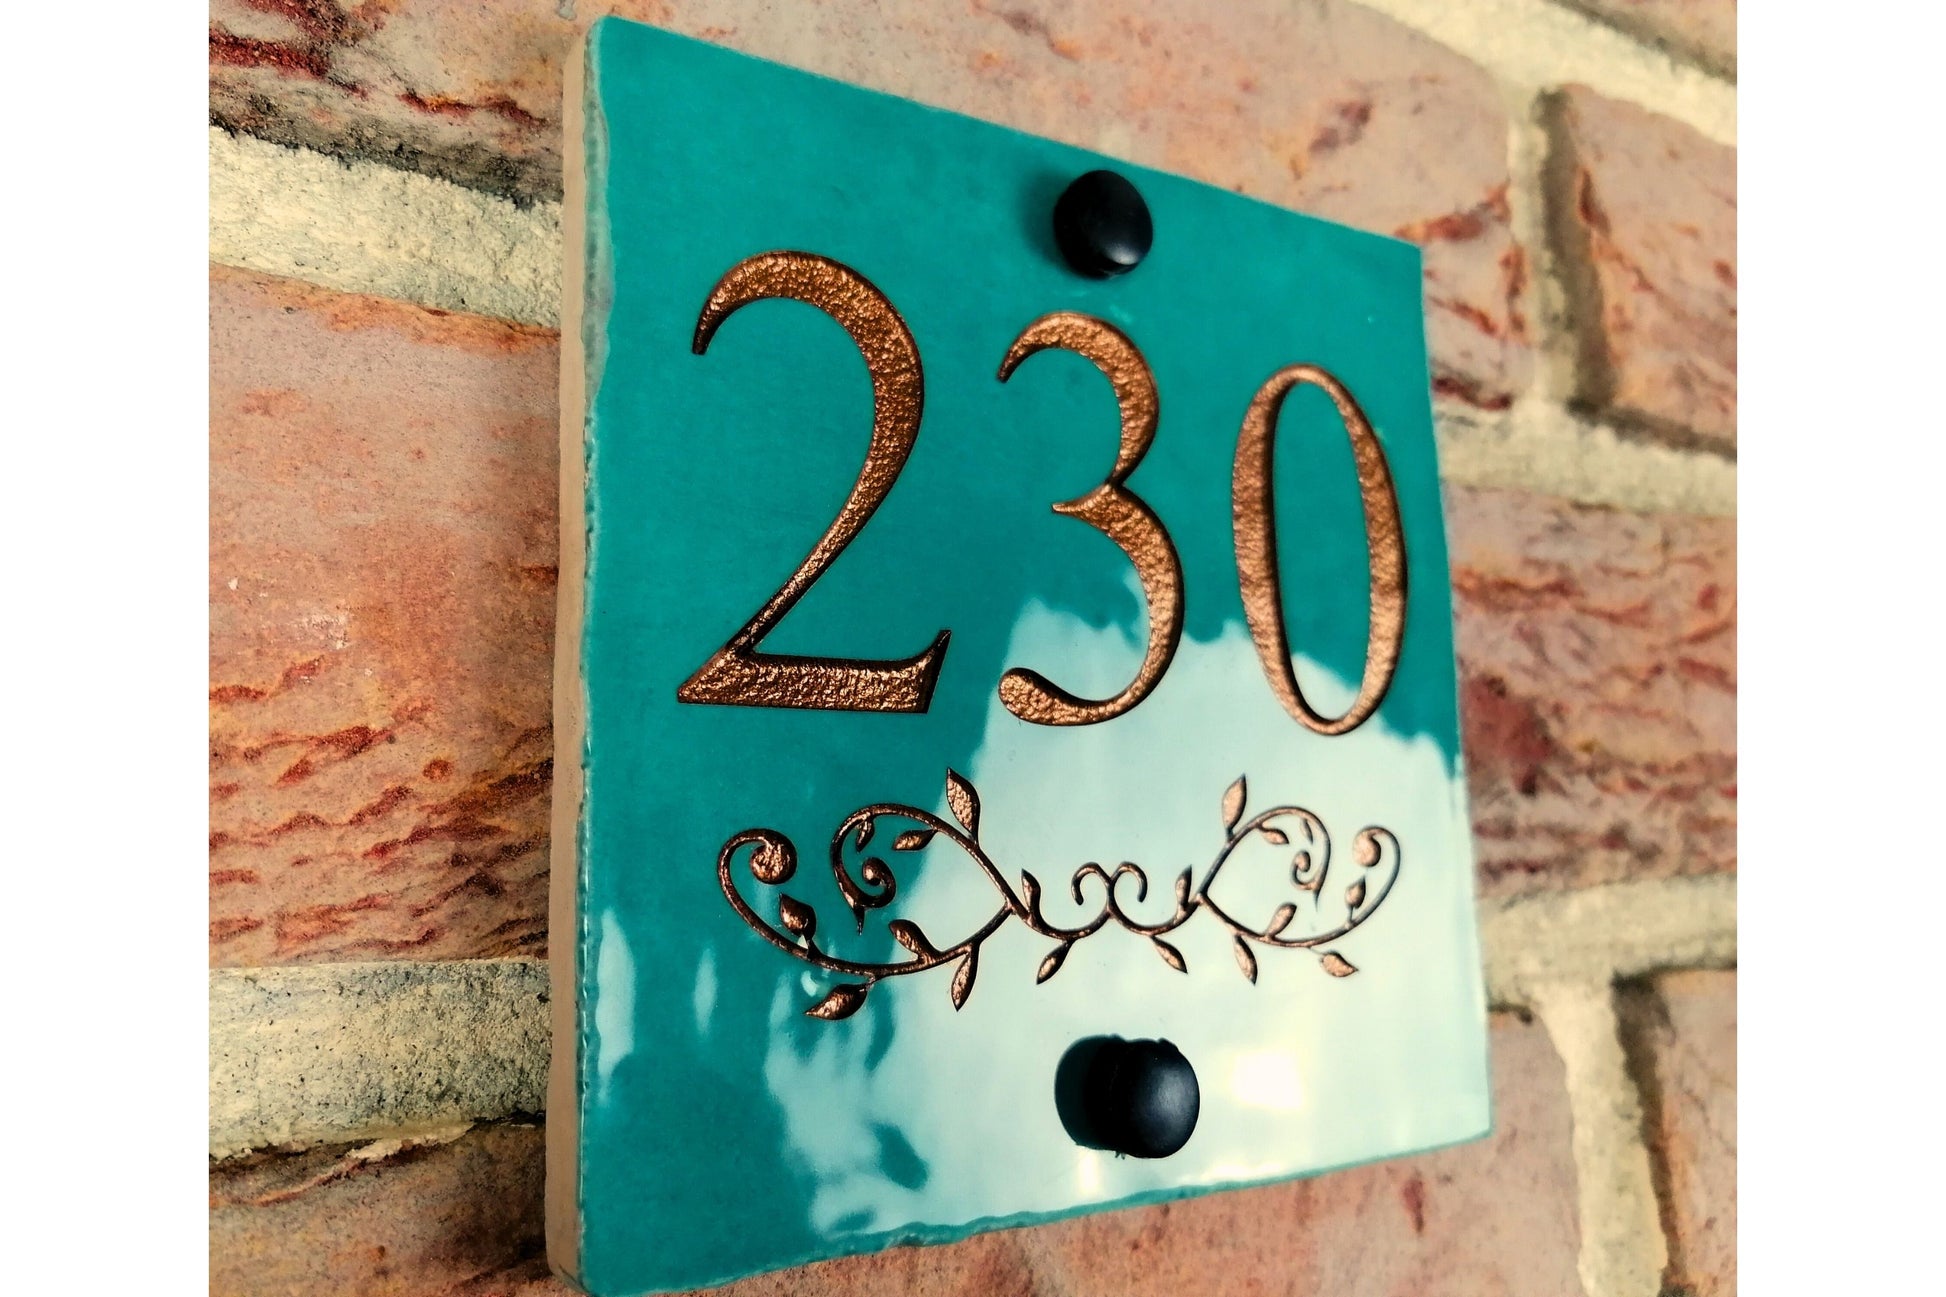 Turquoise ceramic tile address sign engraved with house name and decorative floral motif underneath. Engraving paint options include gold, copper, silver and black. 